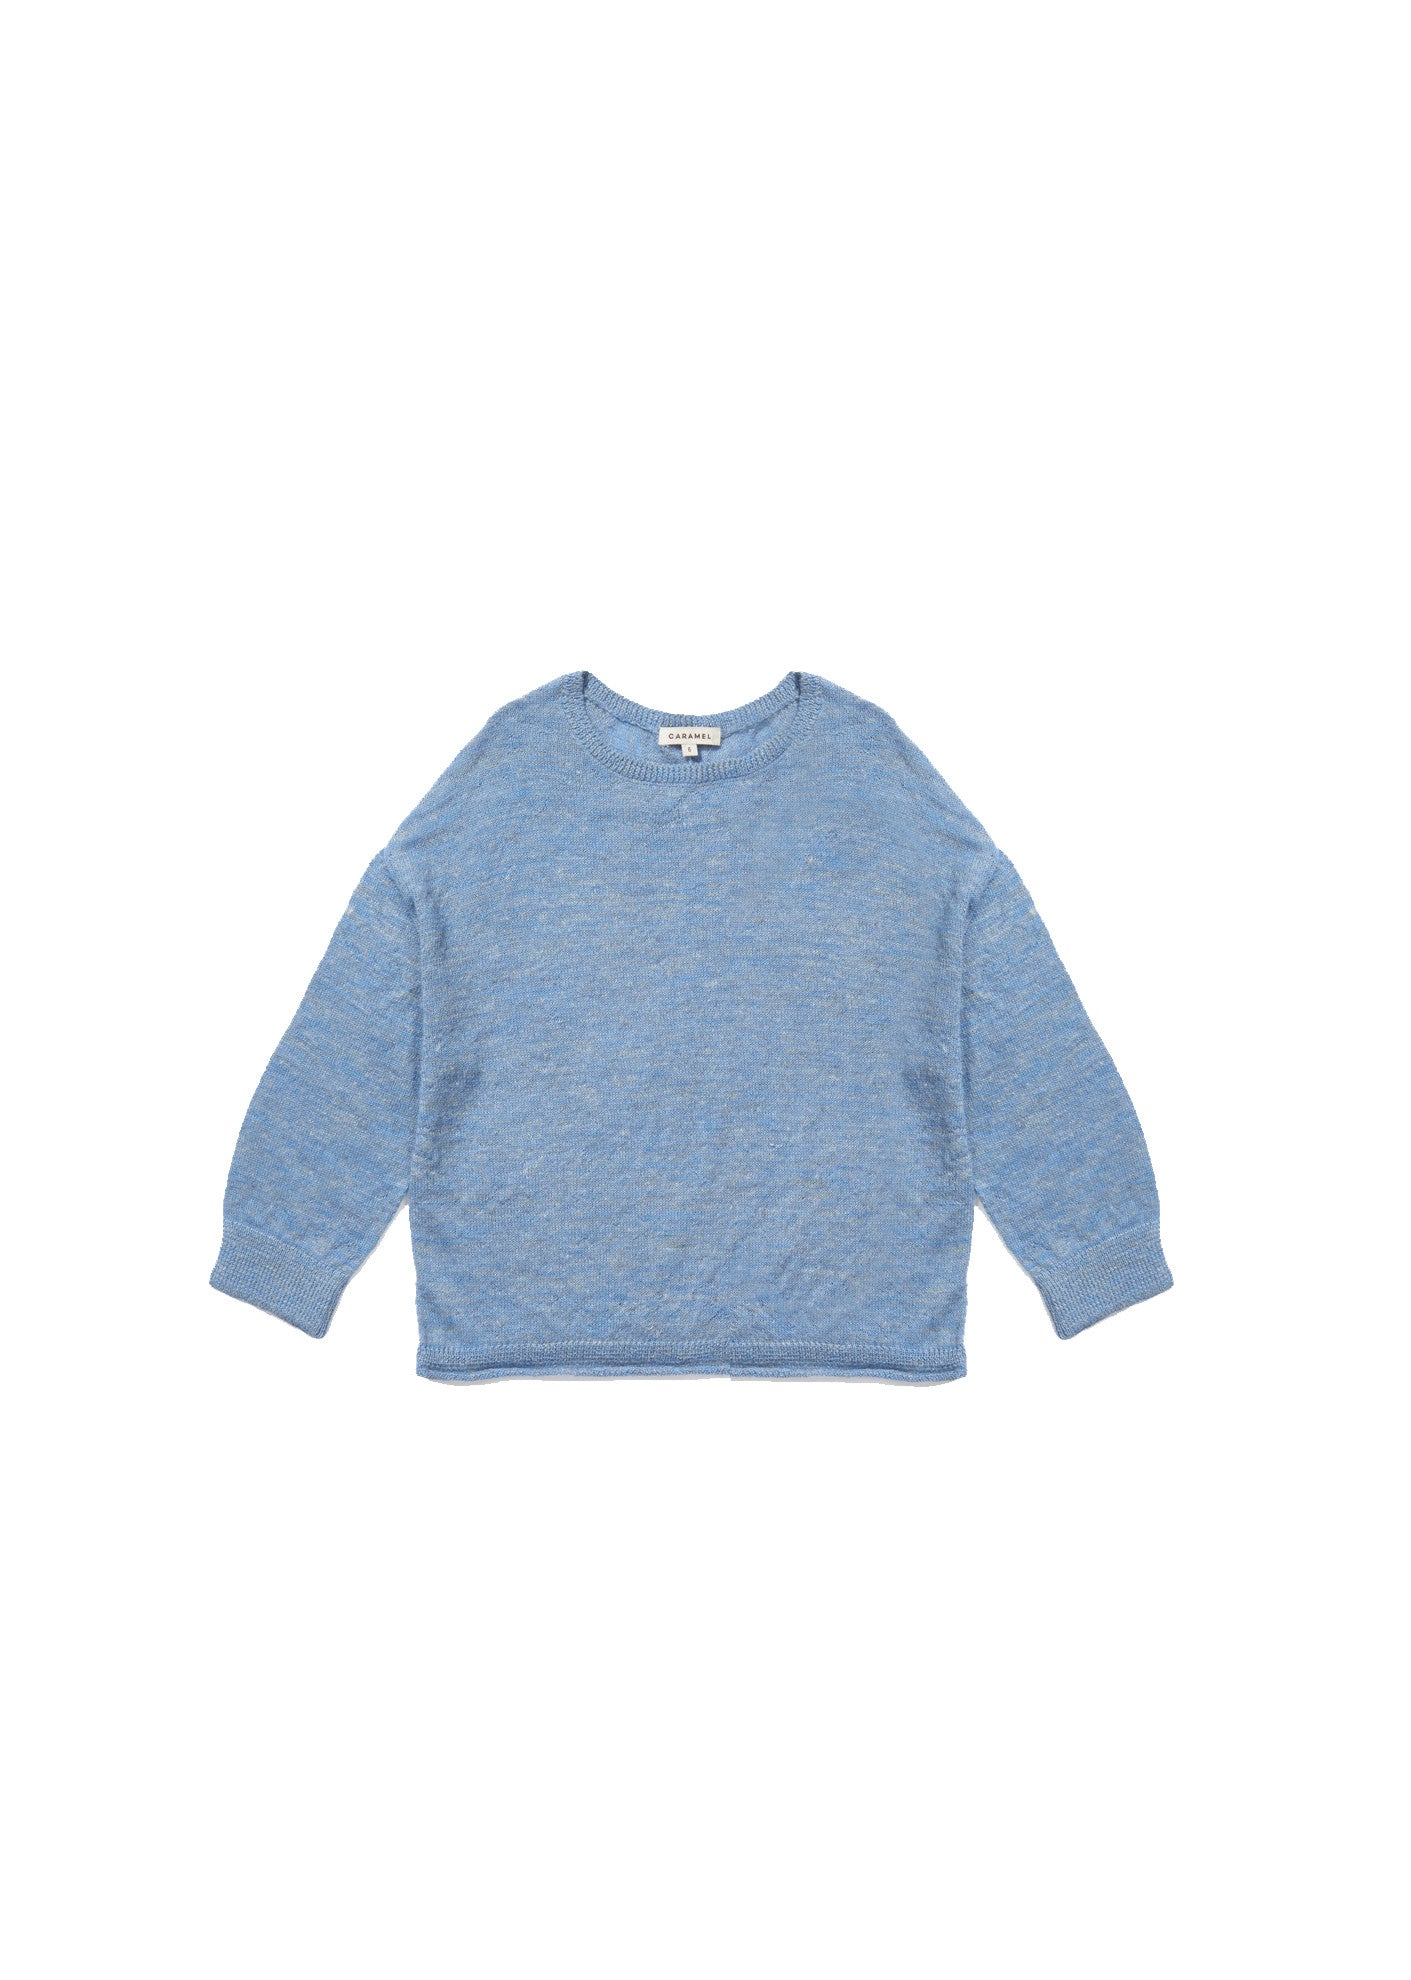 Boys Blue Knitted Sweater